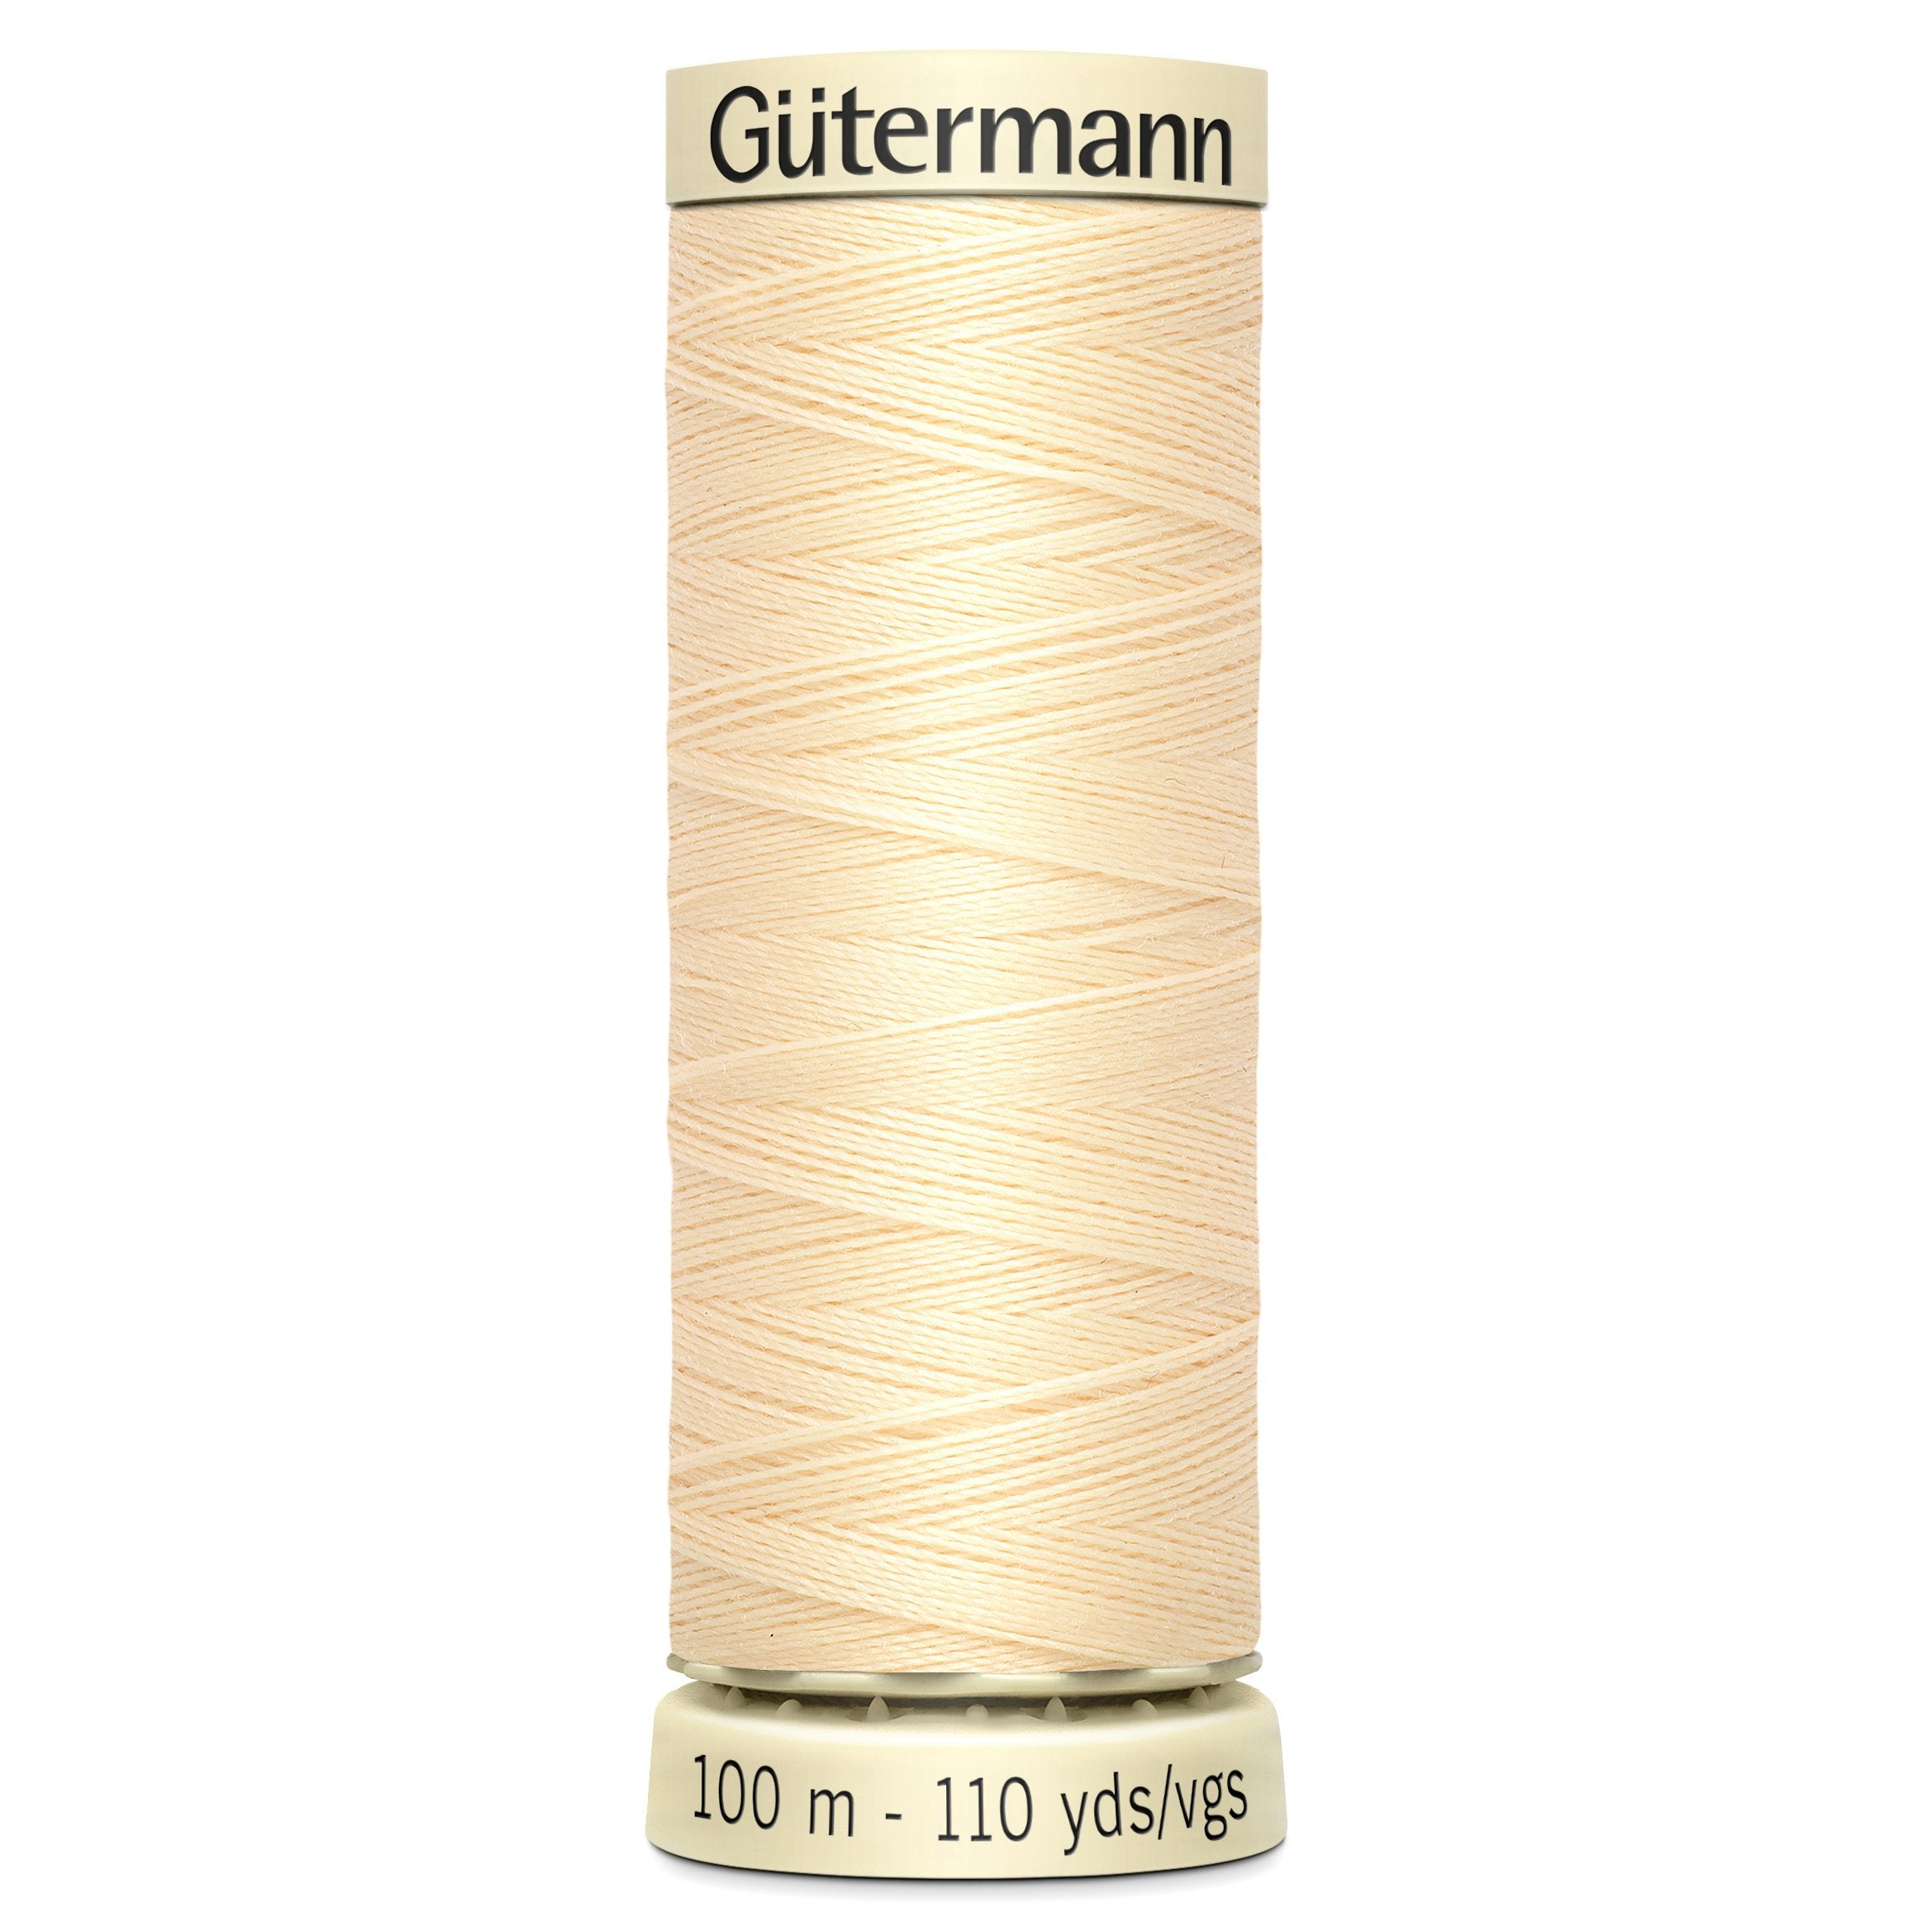 Gutermann Sew All Thread colour 610 Cream from Jaycotts Sewing Supplies